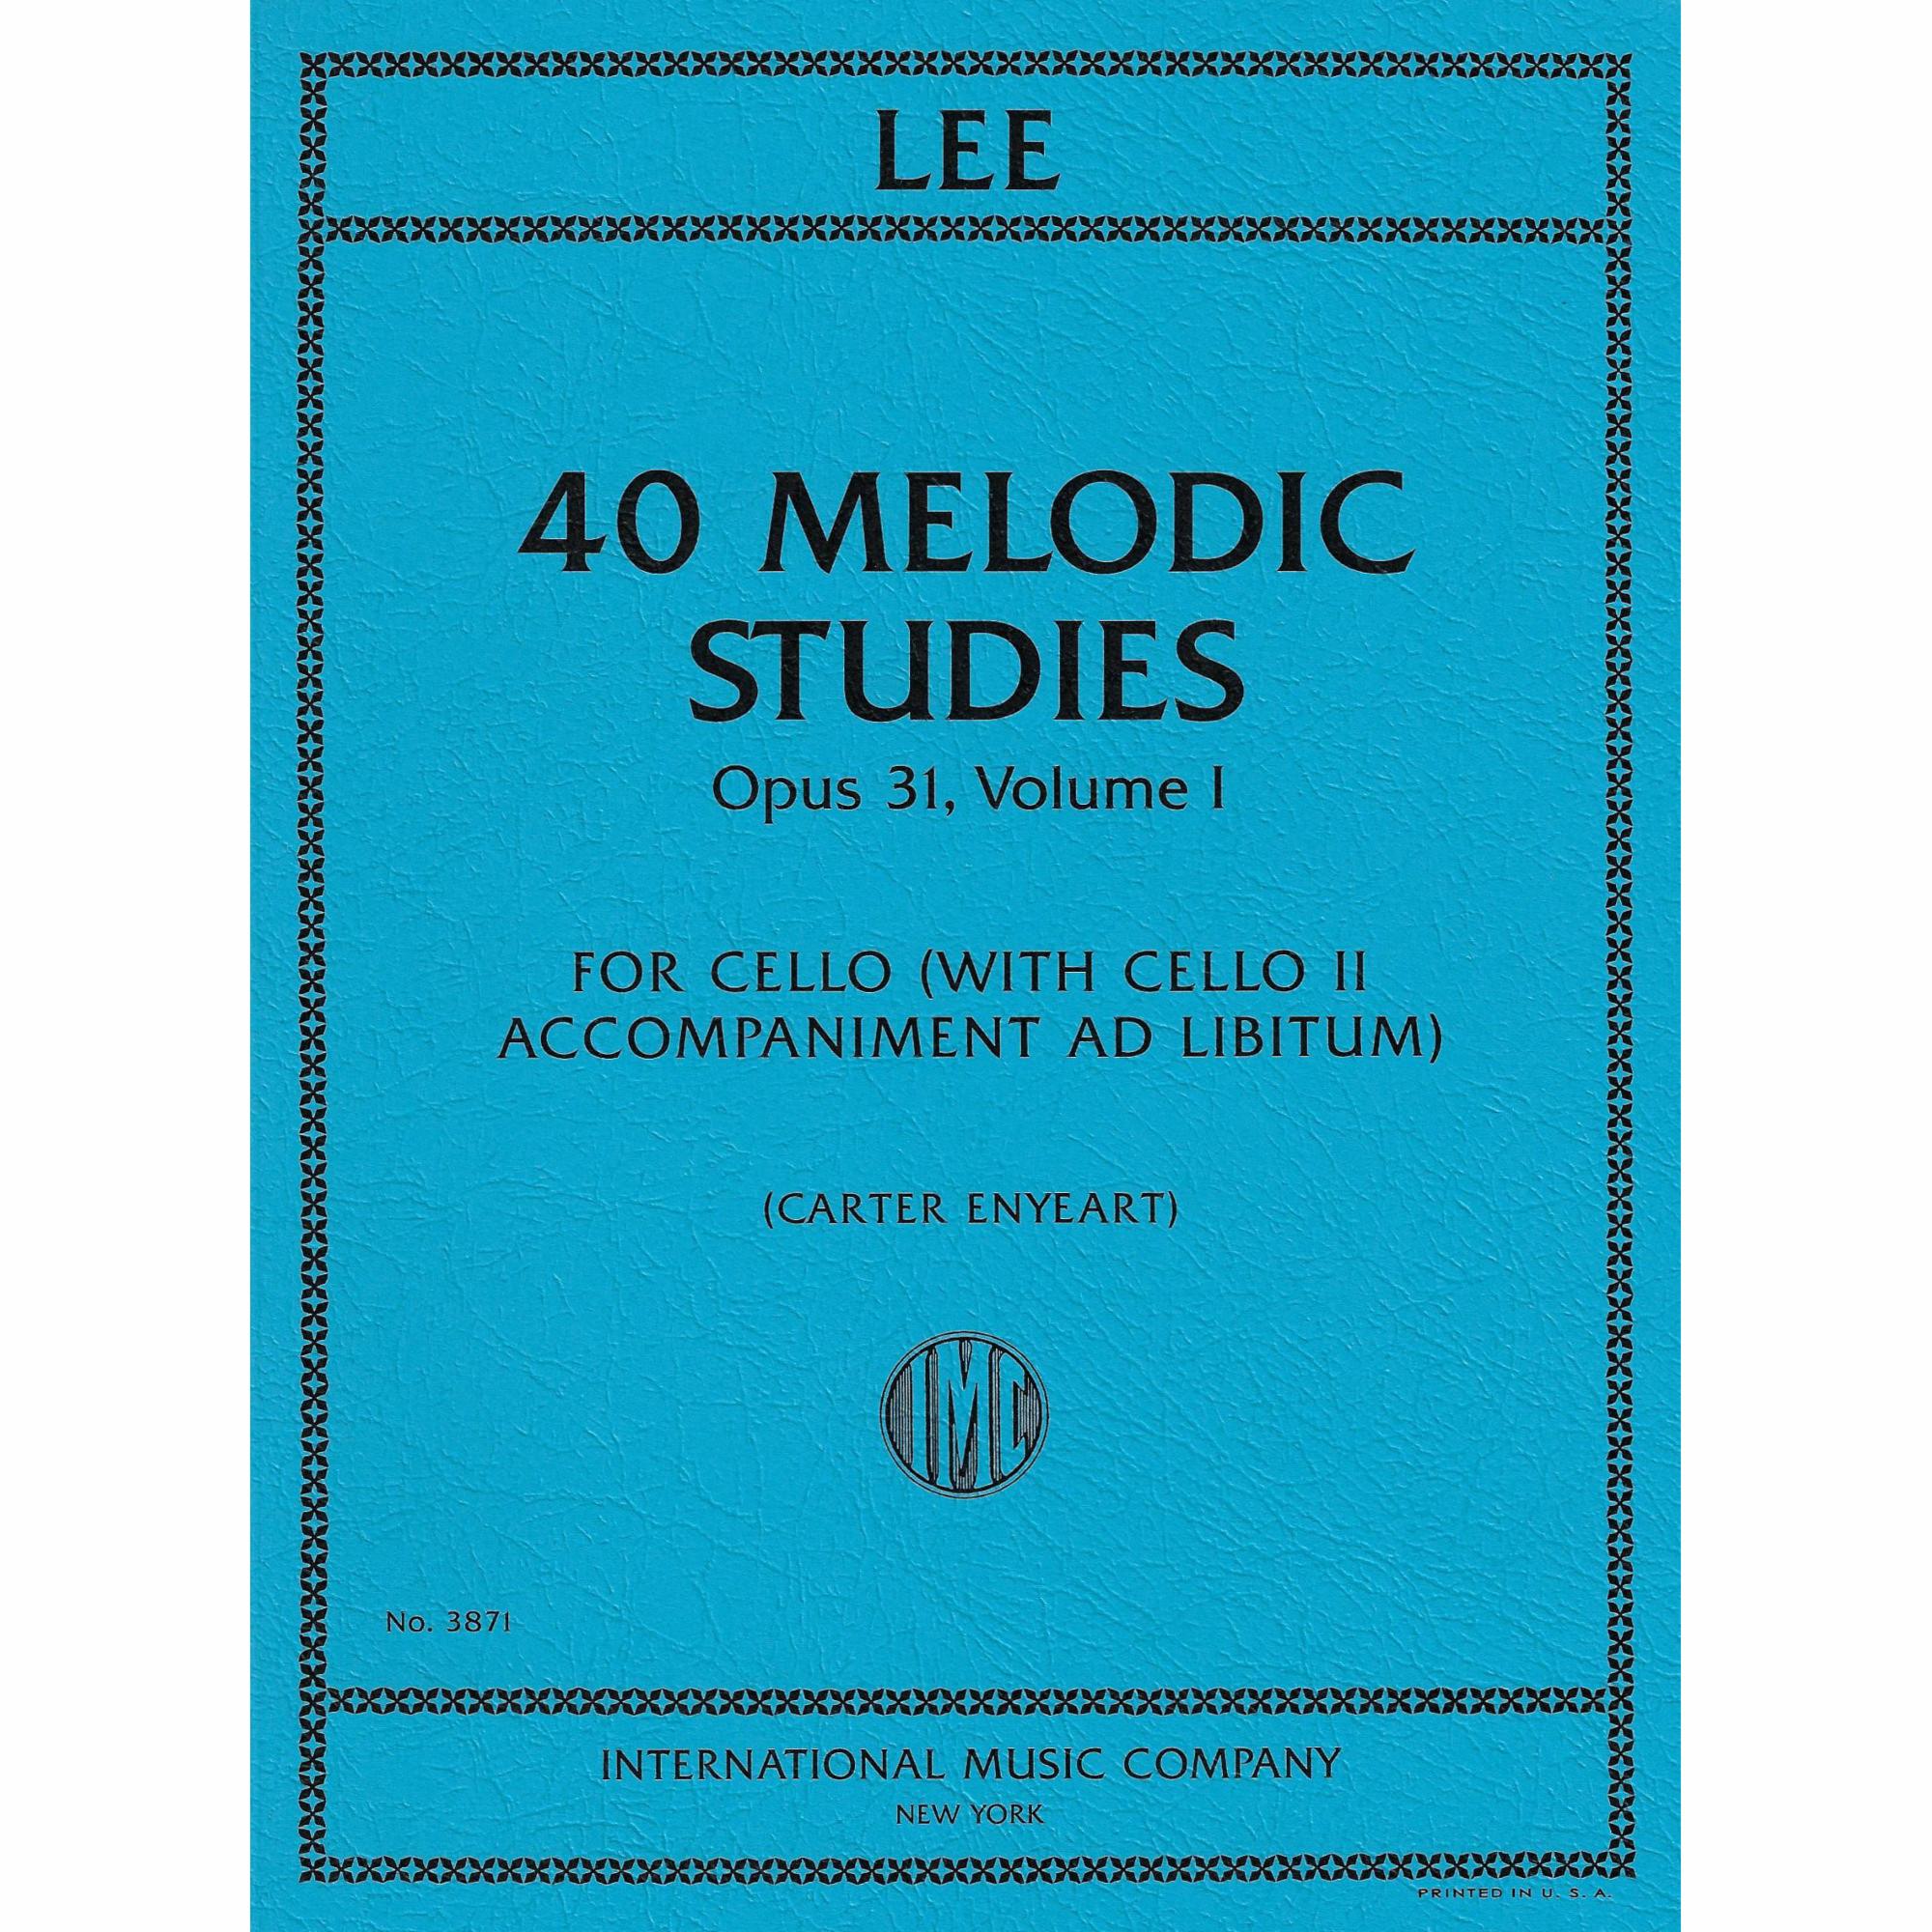 Lee -- 40 Melodic Studies, Op. 31, Vol. I for Cello